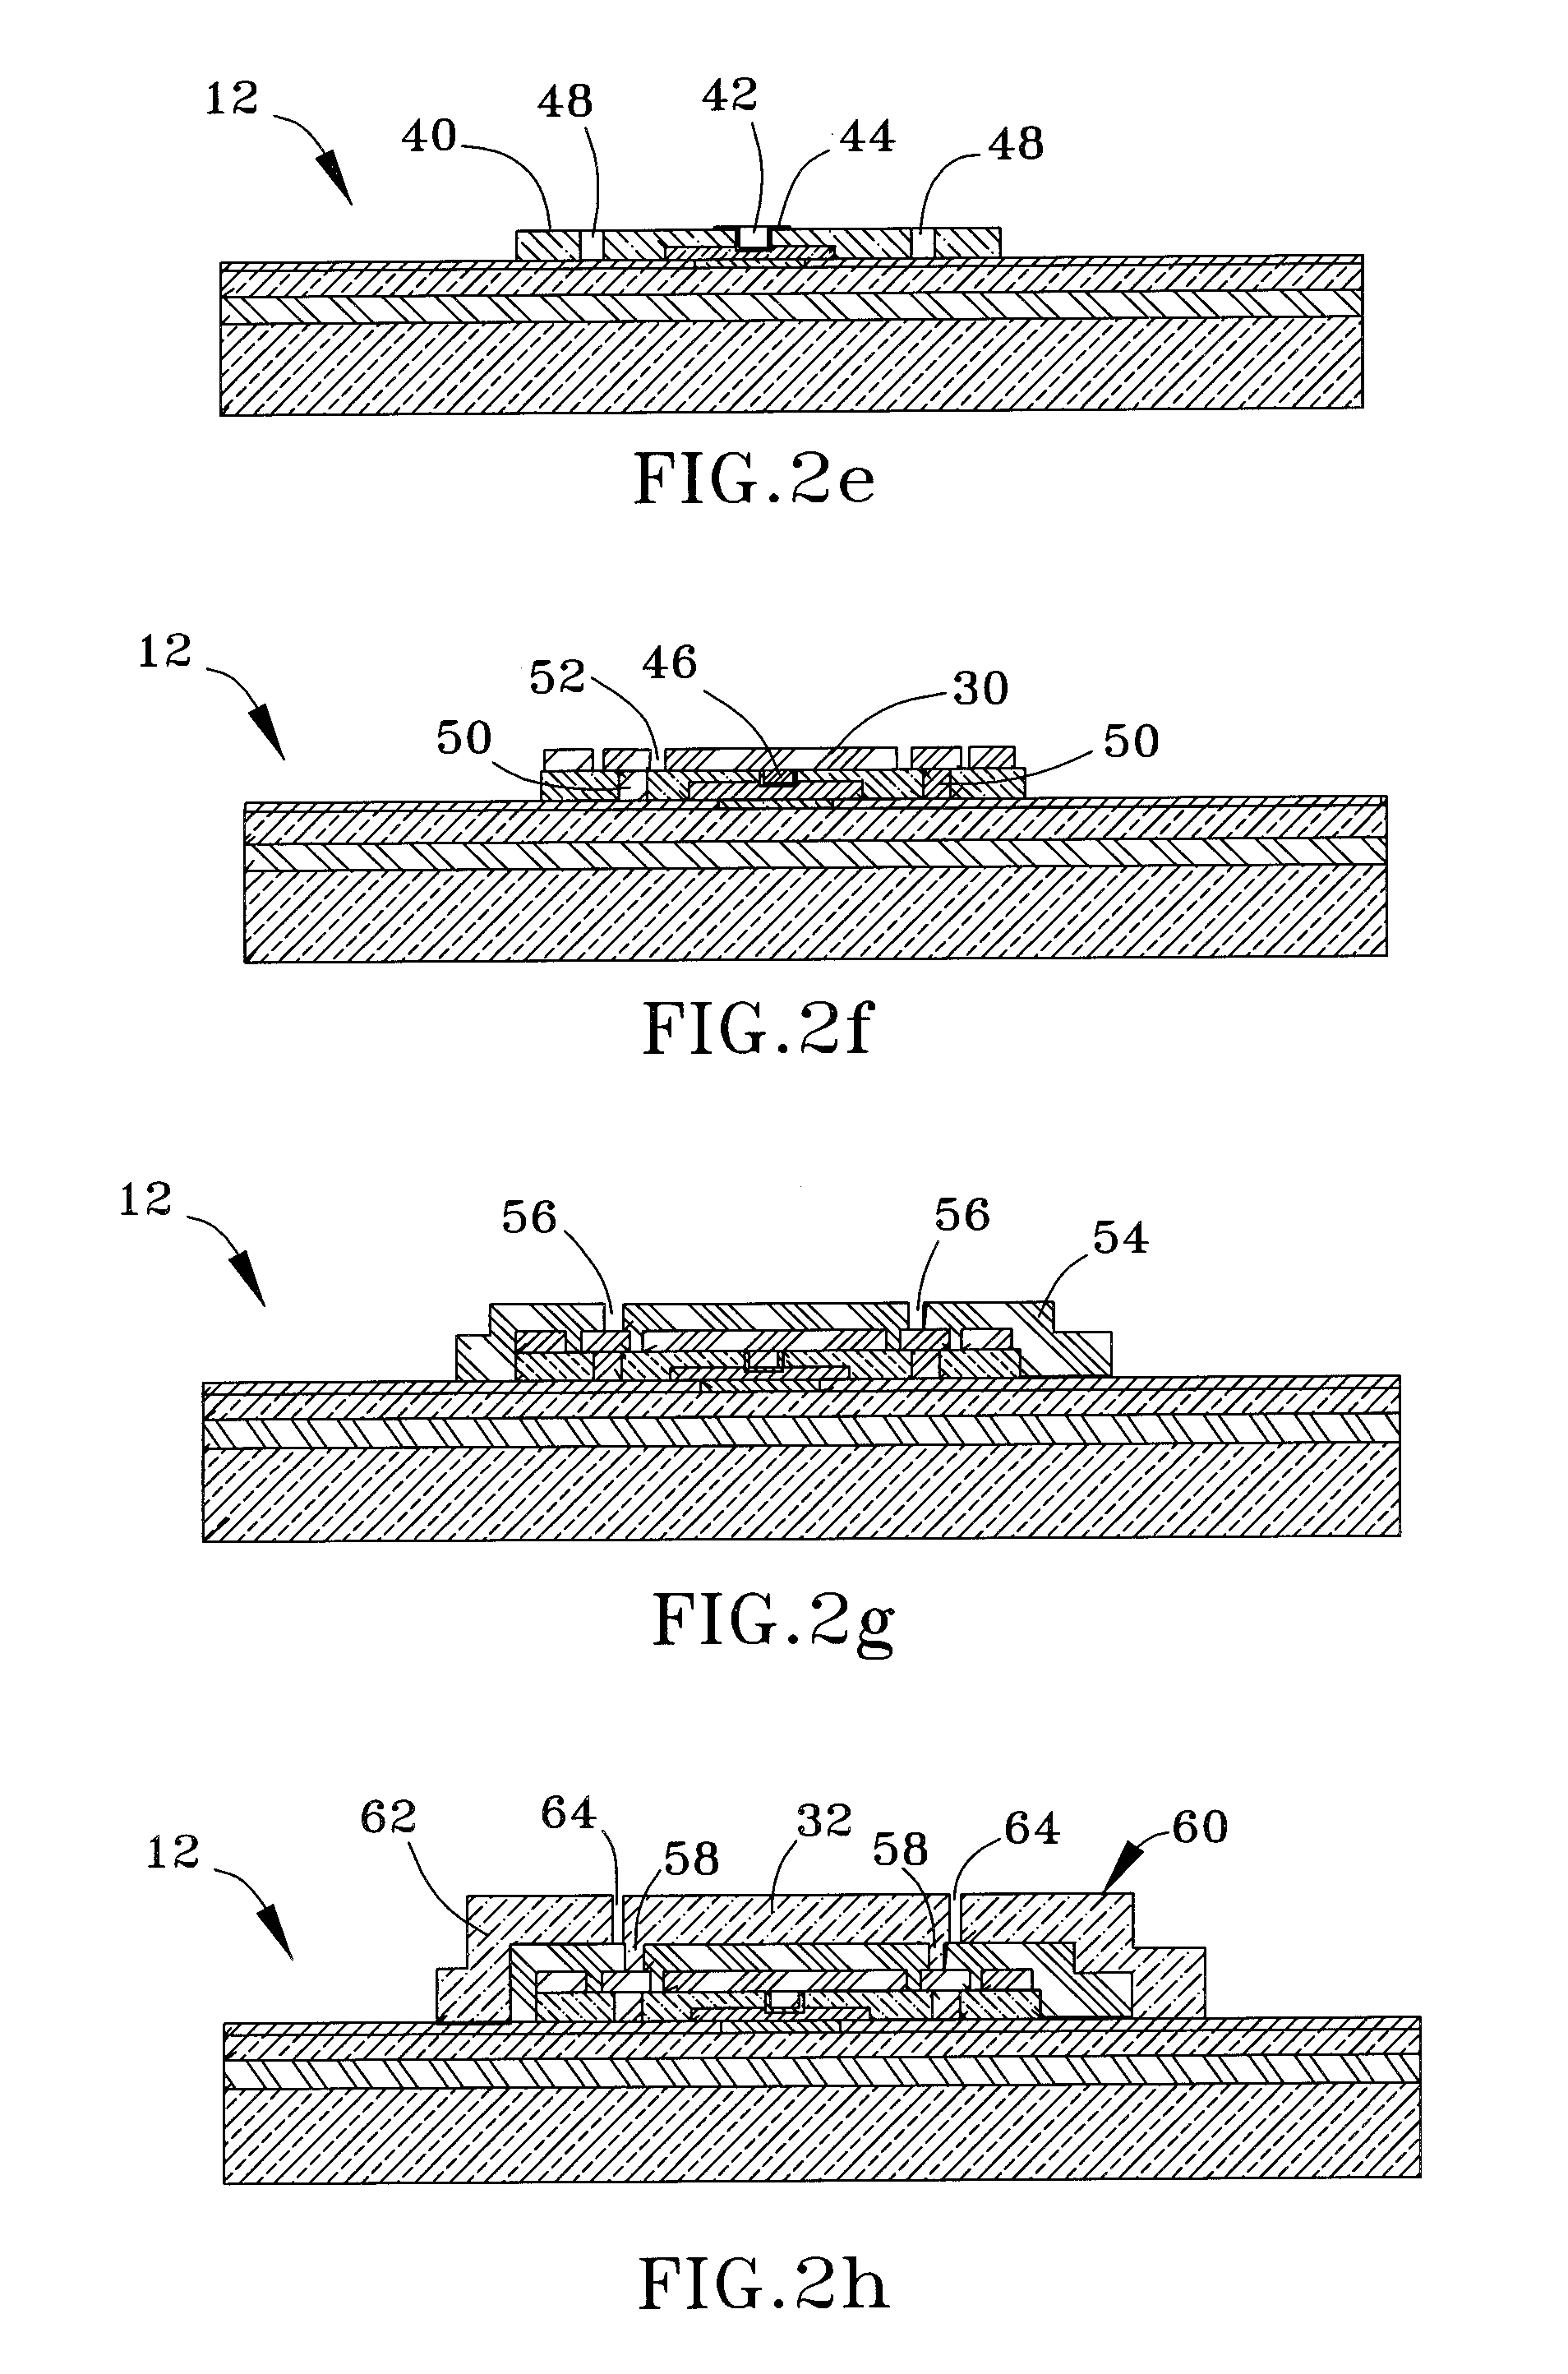 Capacitive pressure sensor and method therefor